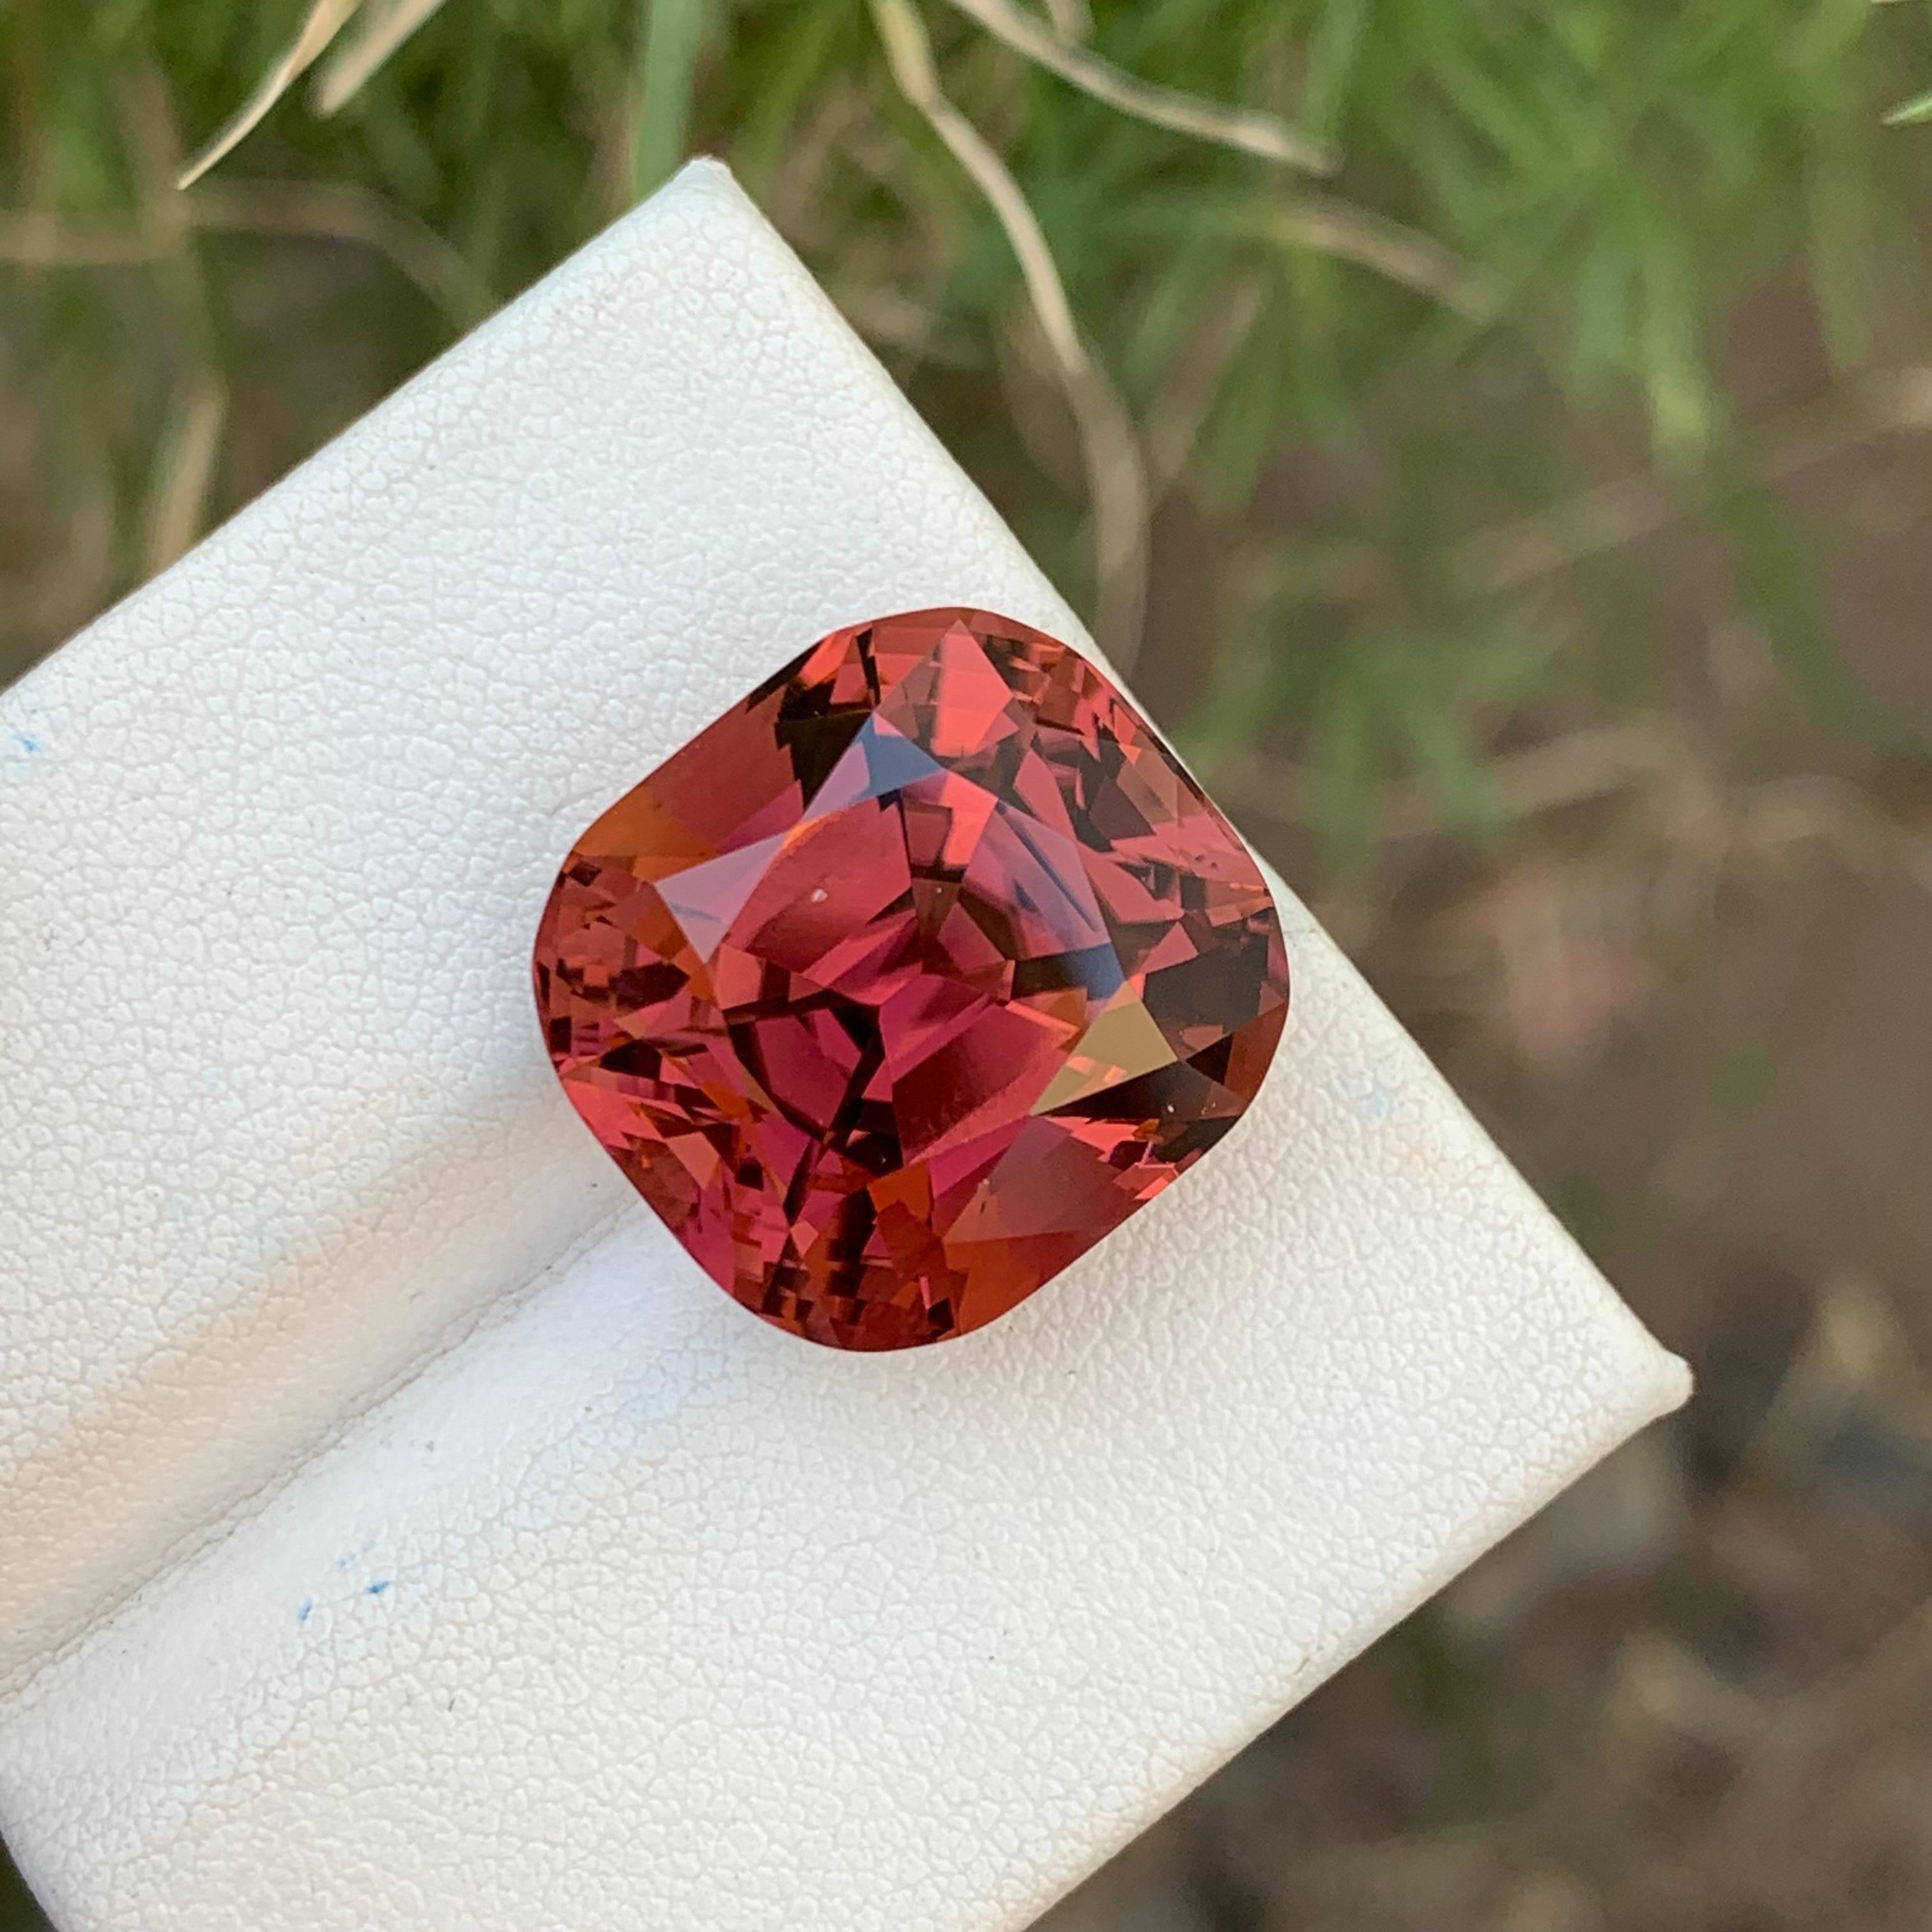 Loose Tourmaline 
Weight: 25.10 Carats 
Dimension: 17.2x16.1x13.3 Mm
Origin: Kunar Afghanistan 
Shape: Cushion
Color: Red Peach
Treatment: Non / Natural 
Certificate: On Client Demand
Peach Red Tourmaline, a captivating variety within the Tourmaline